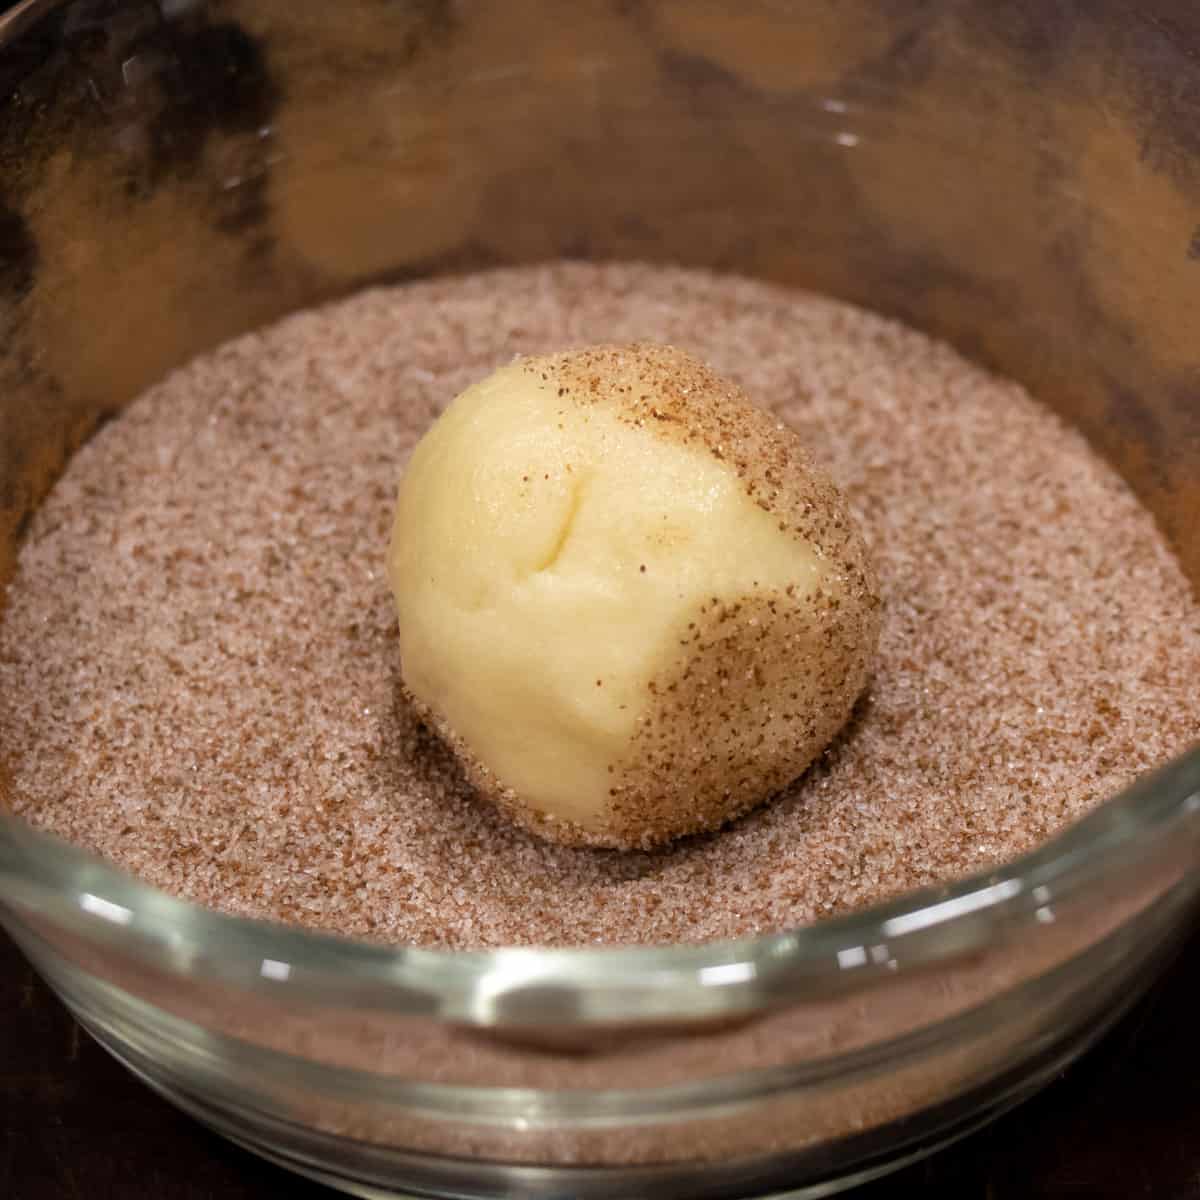 A ball of cookie dough rolled in cinnamon sugar.